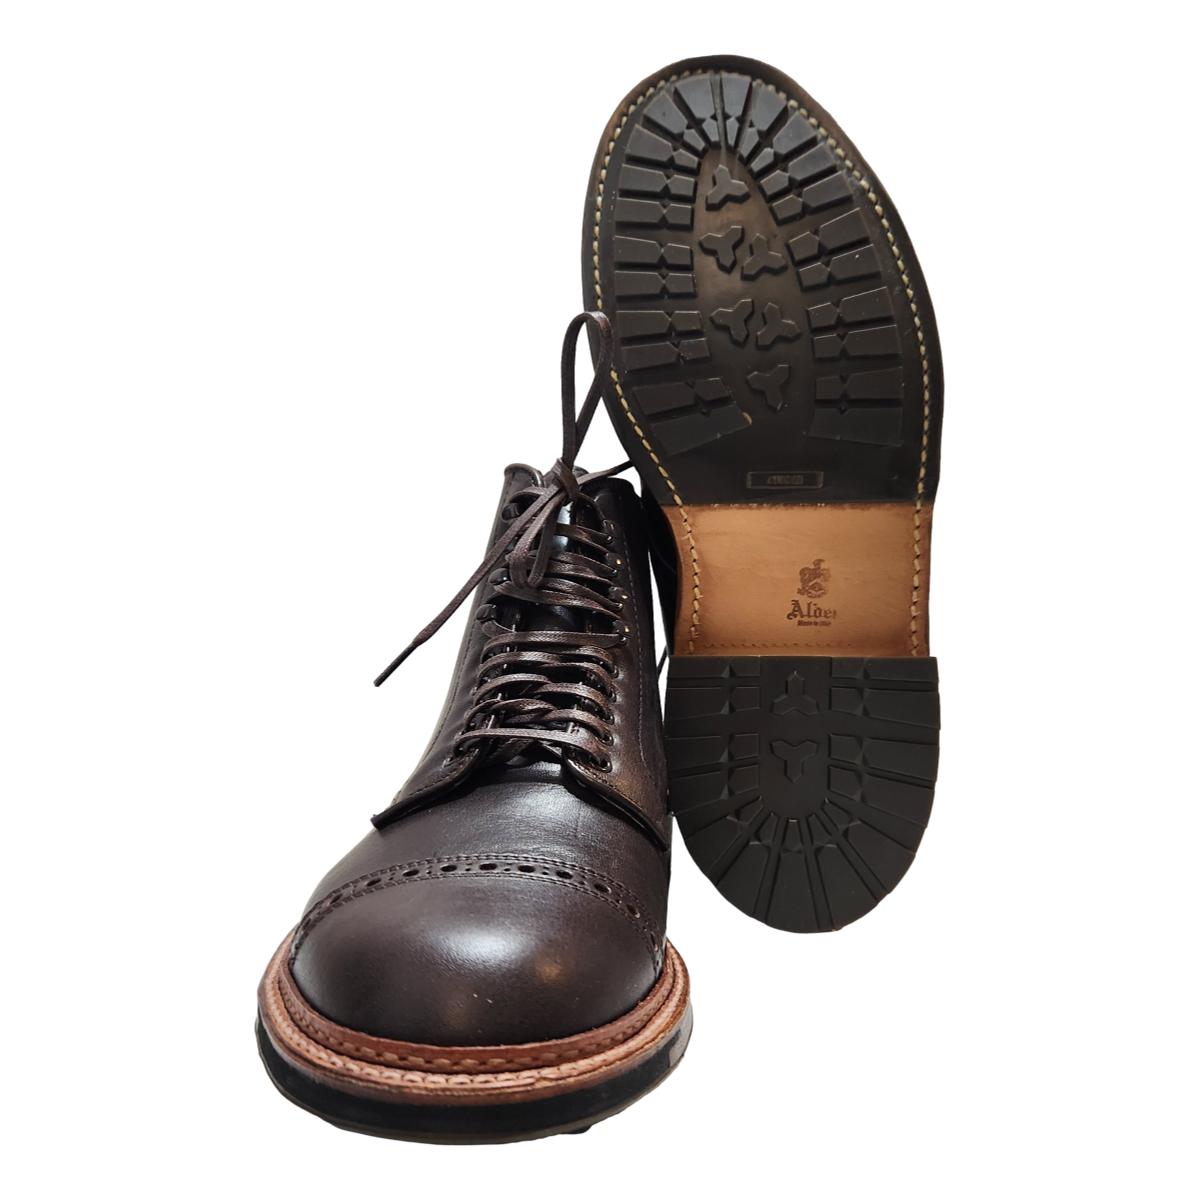 Alden Jumper Boot Brown Arabica Leather - Shoes/Boots